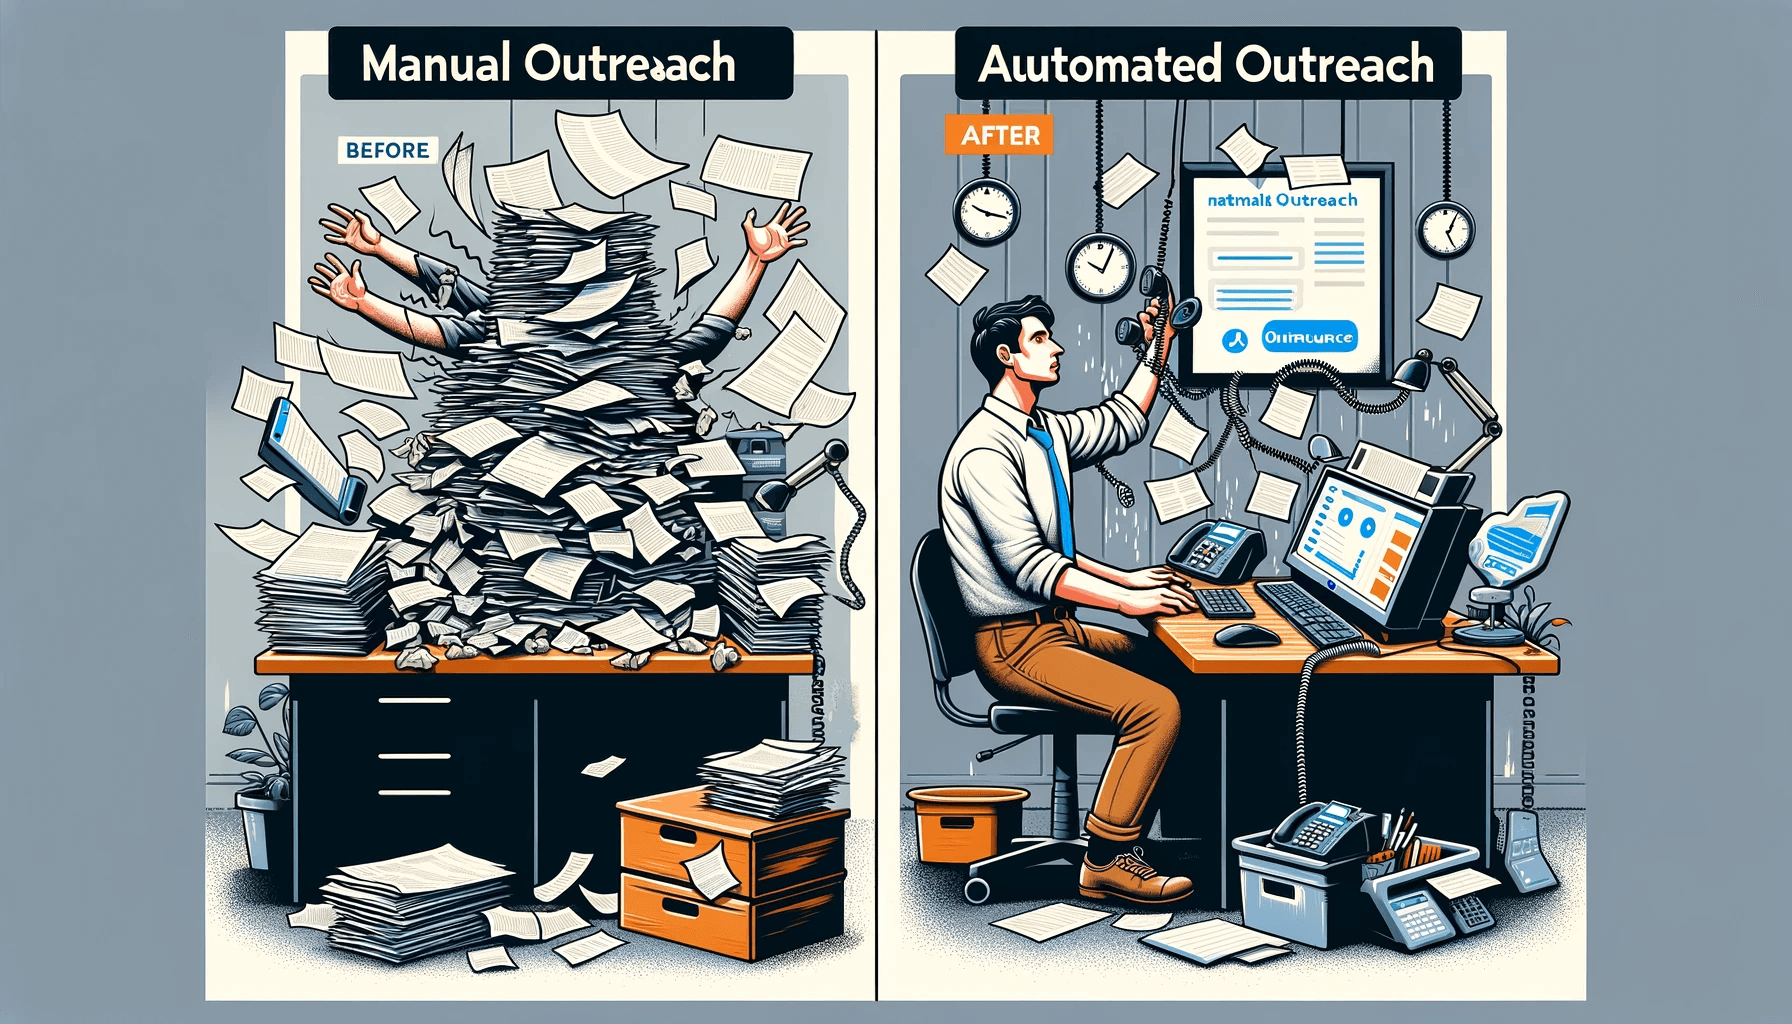 A split scene contrasting chaotic manual outreach on the left with an organized, automated outreach setting on the right.